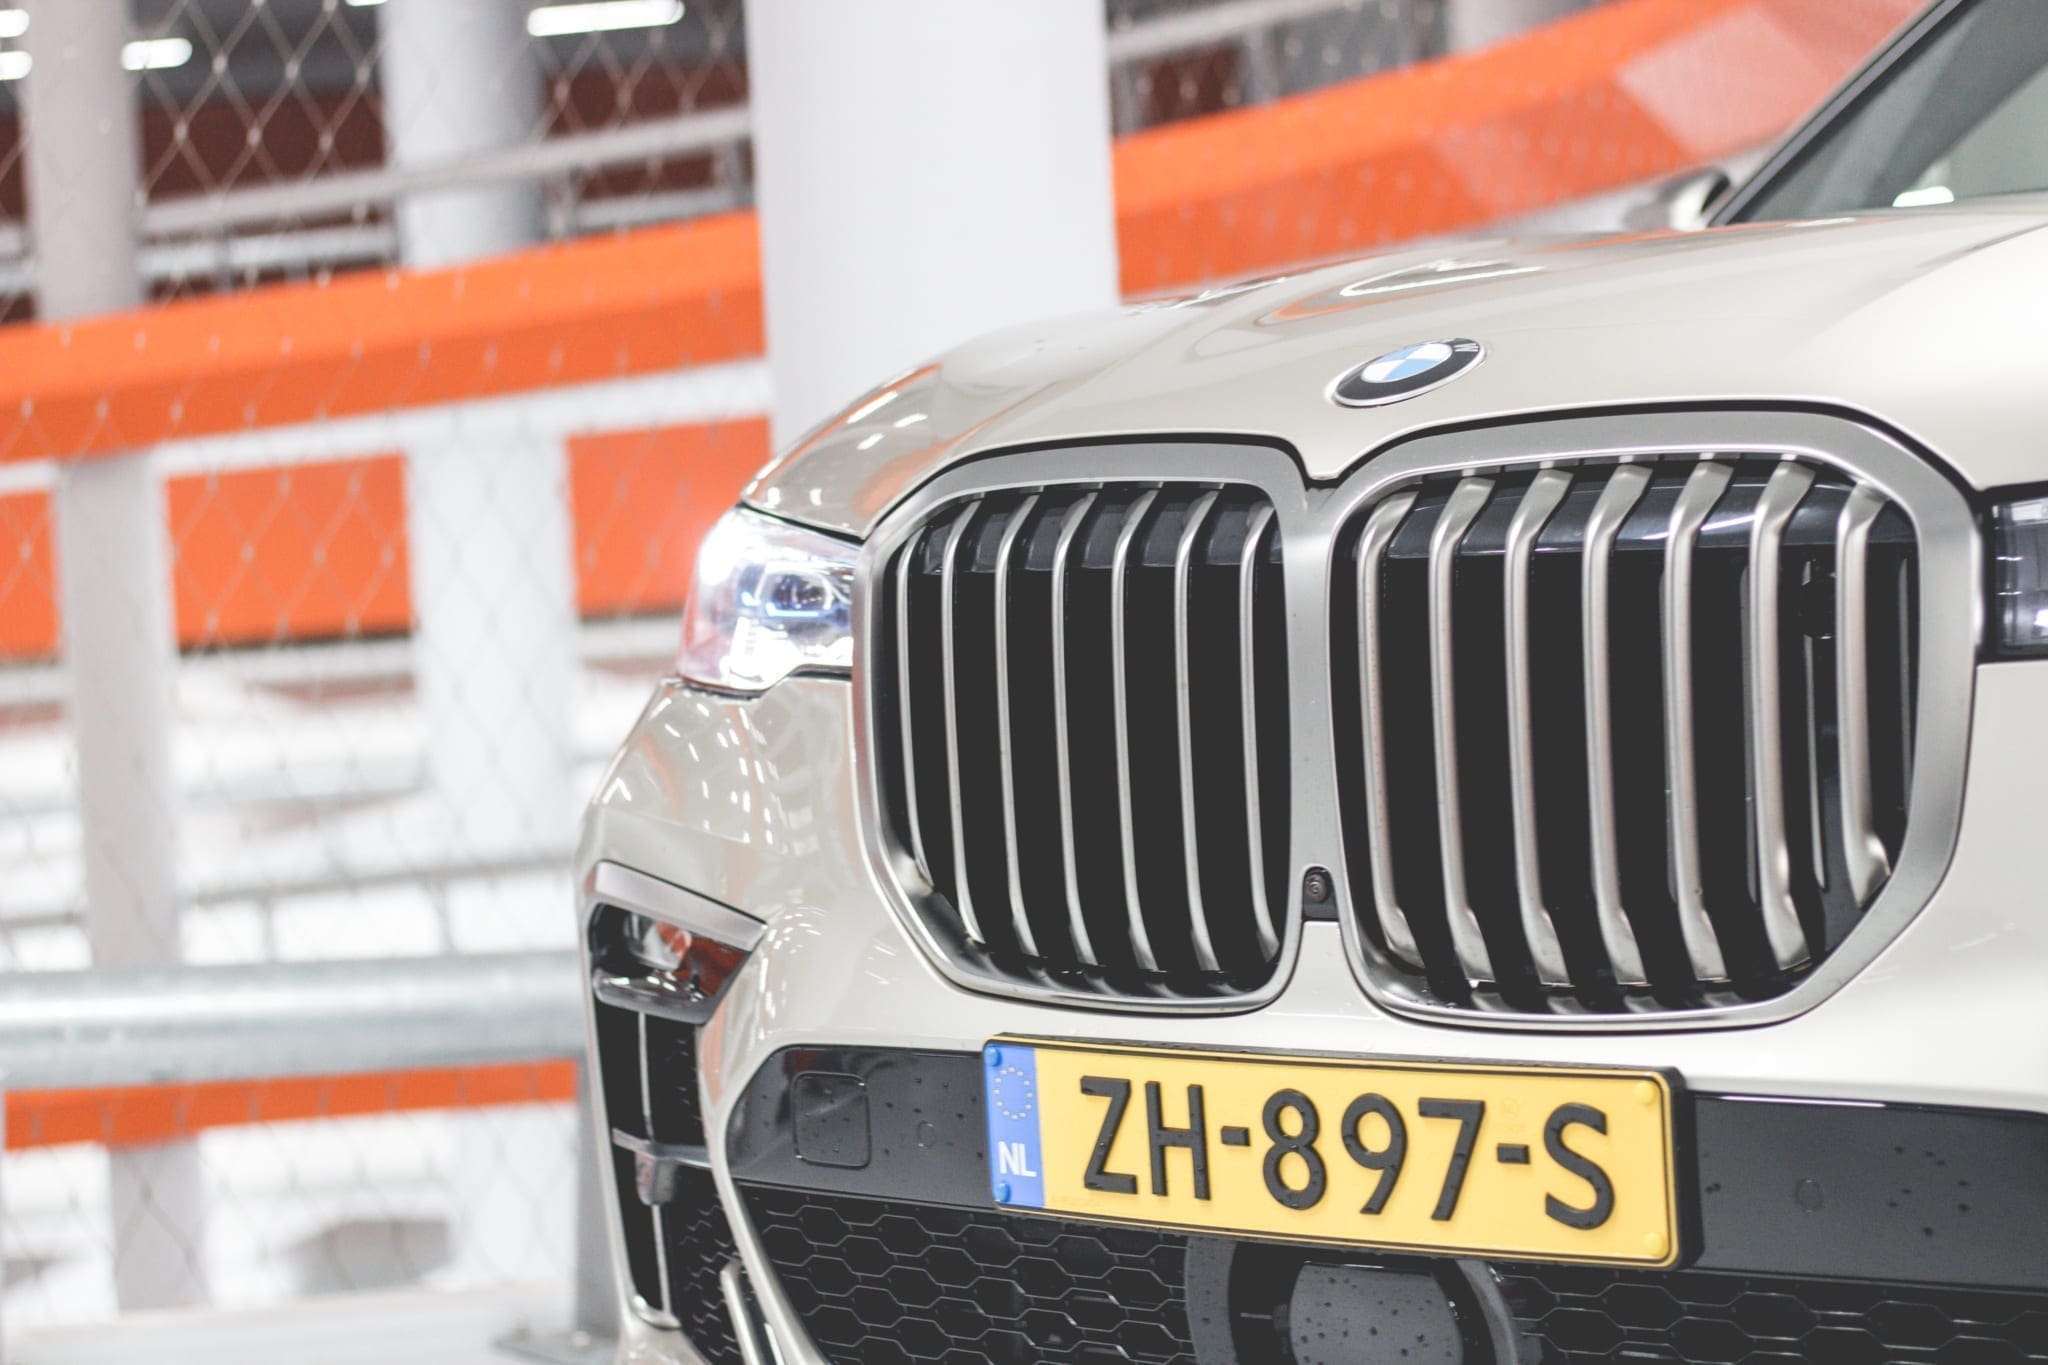 BMW X7, T(h)ank you BMW for the X7 M50d!